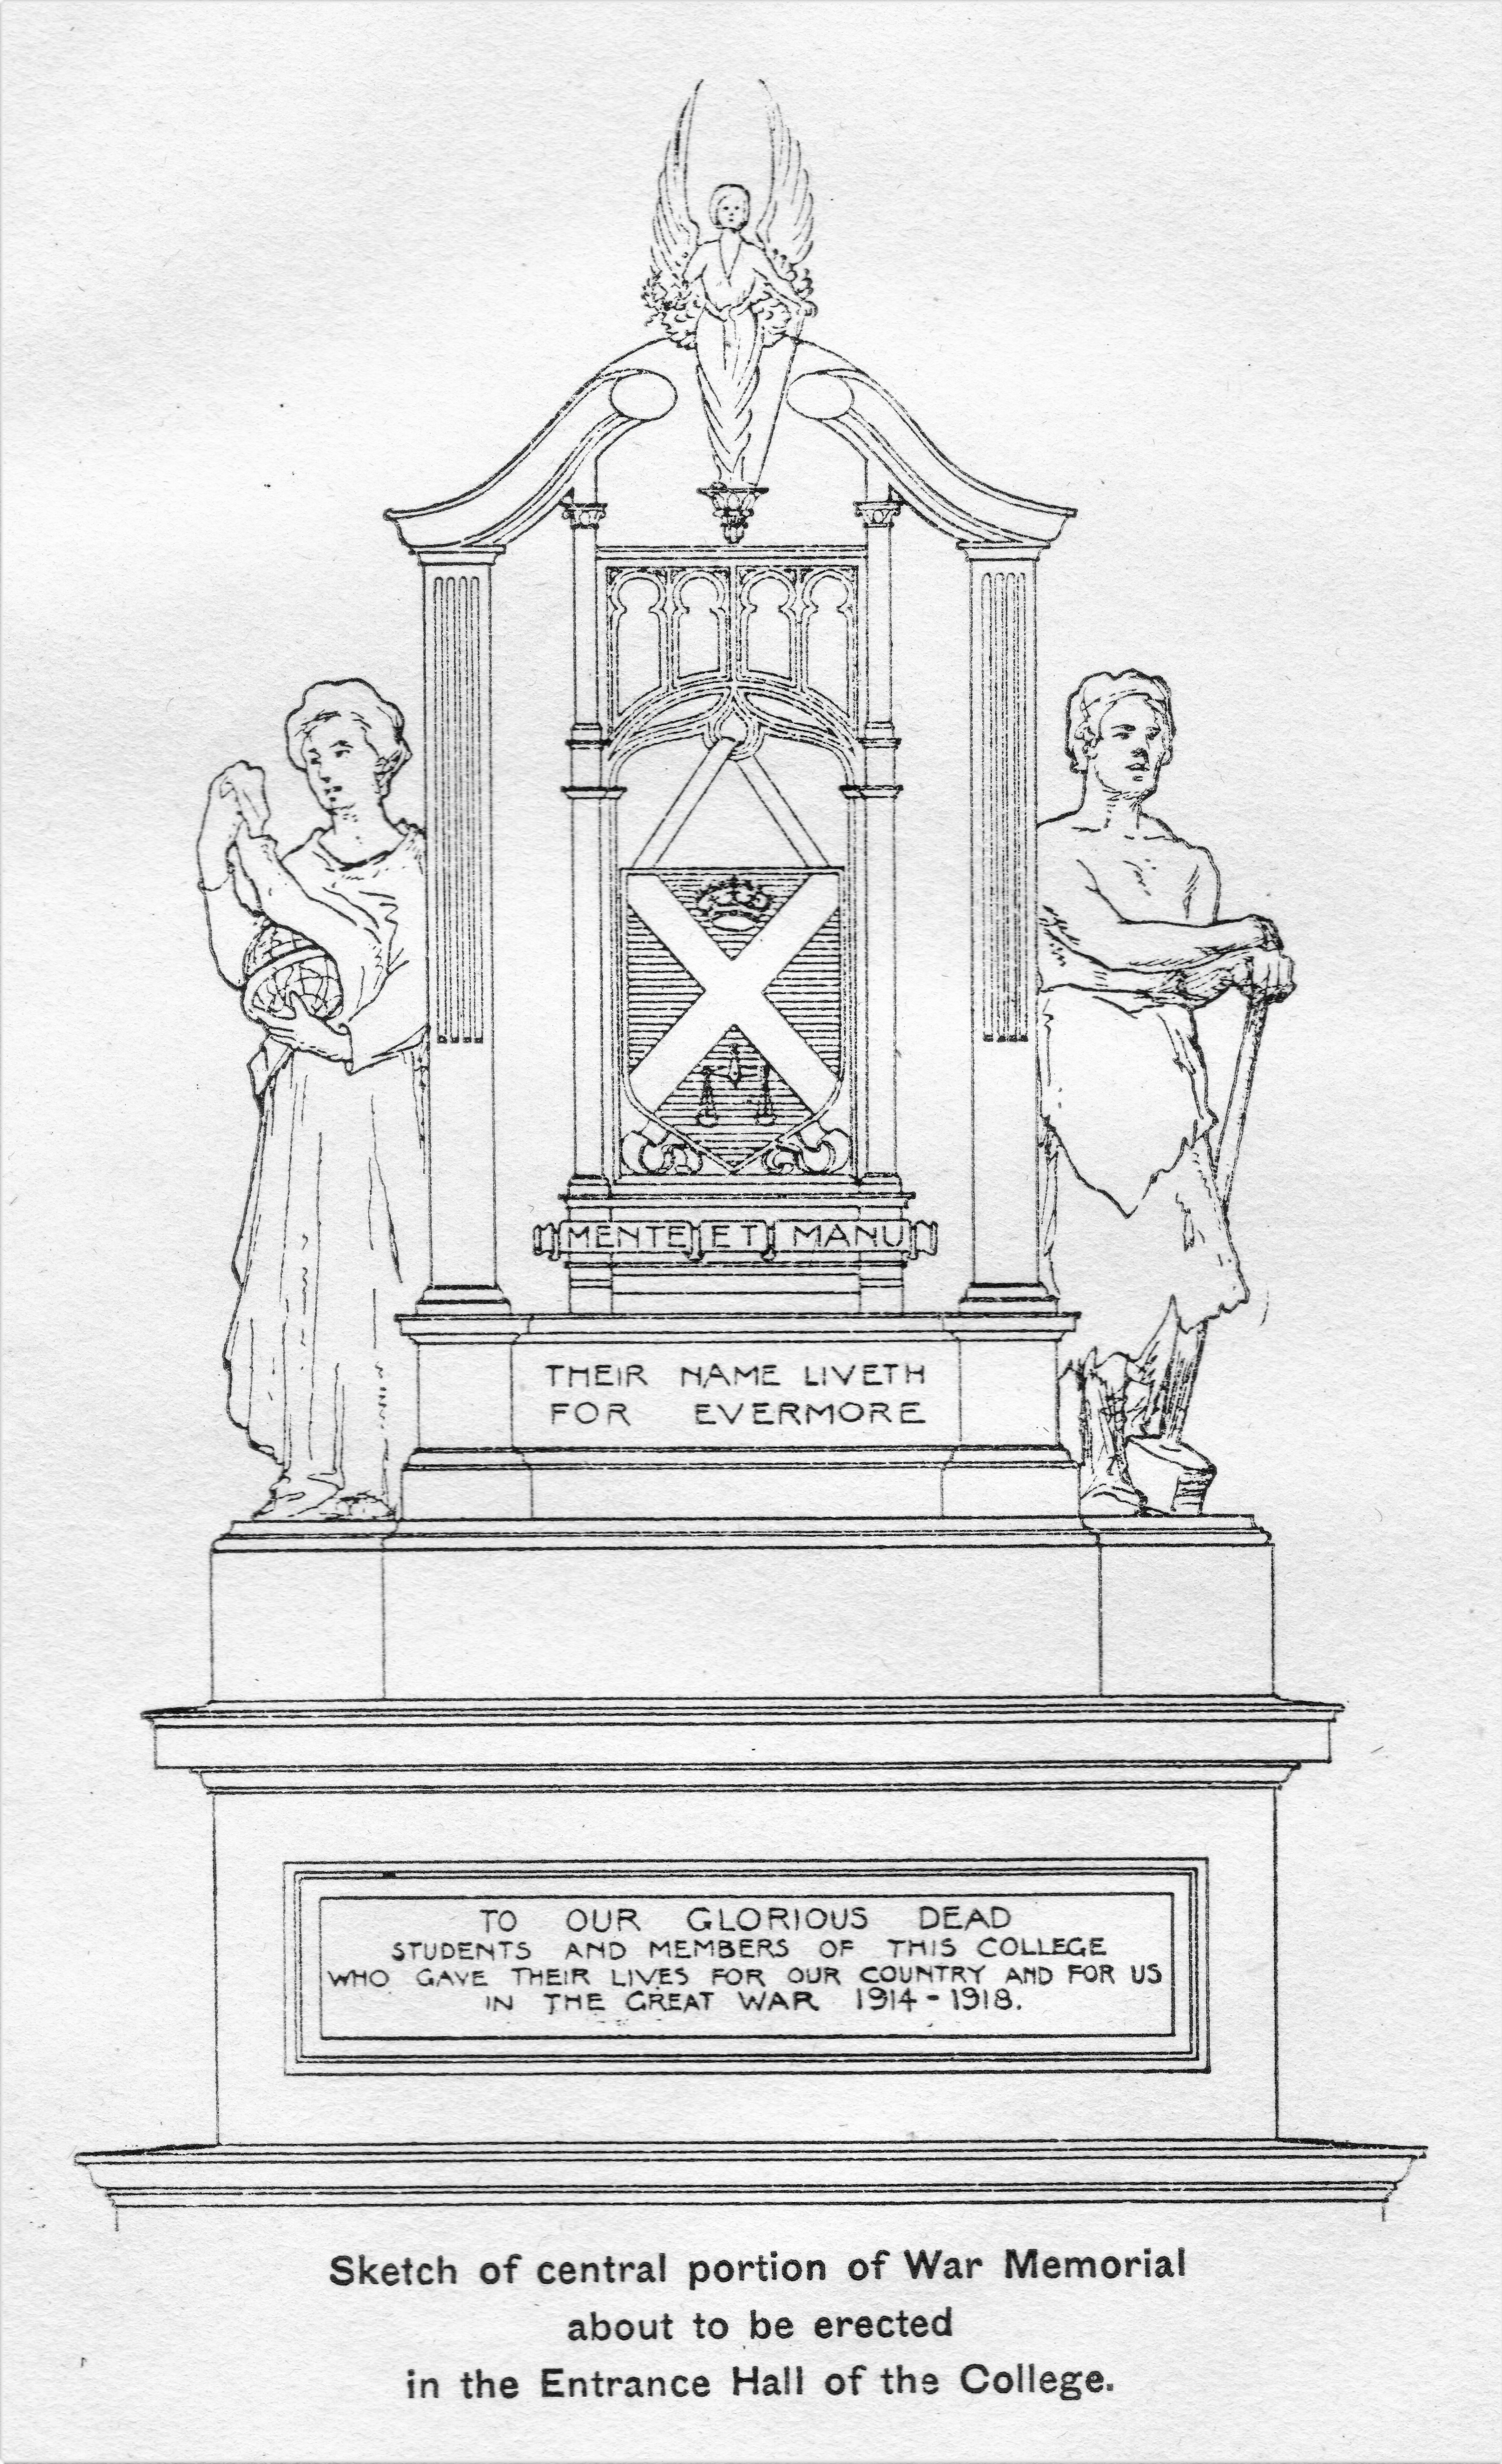 Sketch of central portion of War Memorial about to be erected in the entrance hall of the College. It reads 